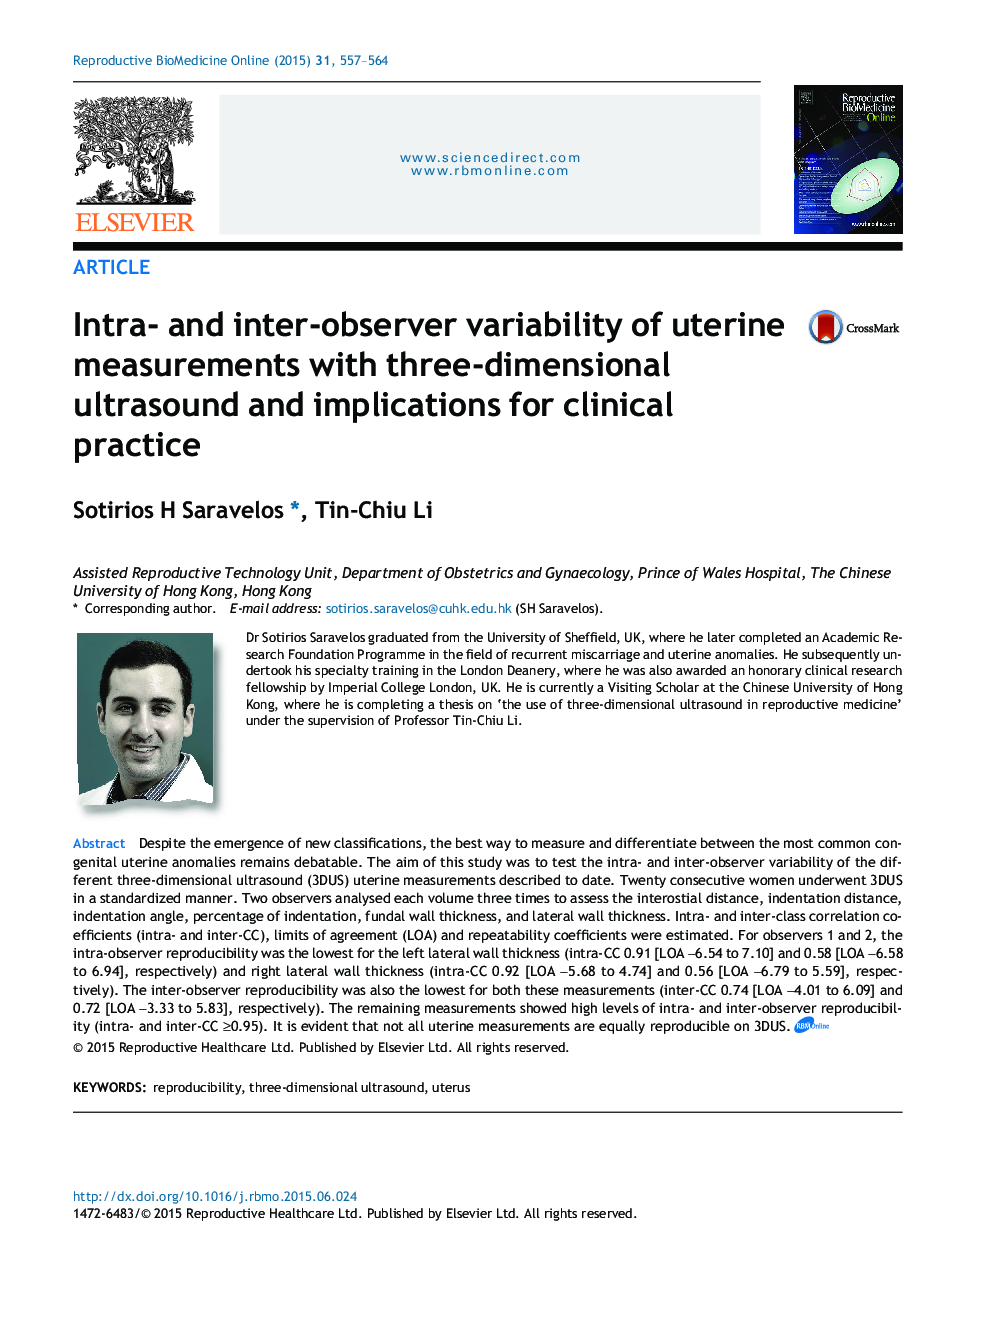 Intra- and inter-observer variability of uterine measurements with three-dimensional ultrasound and implications for clinical practice